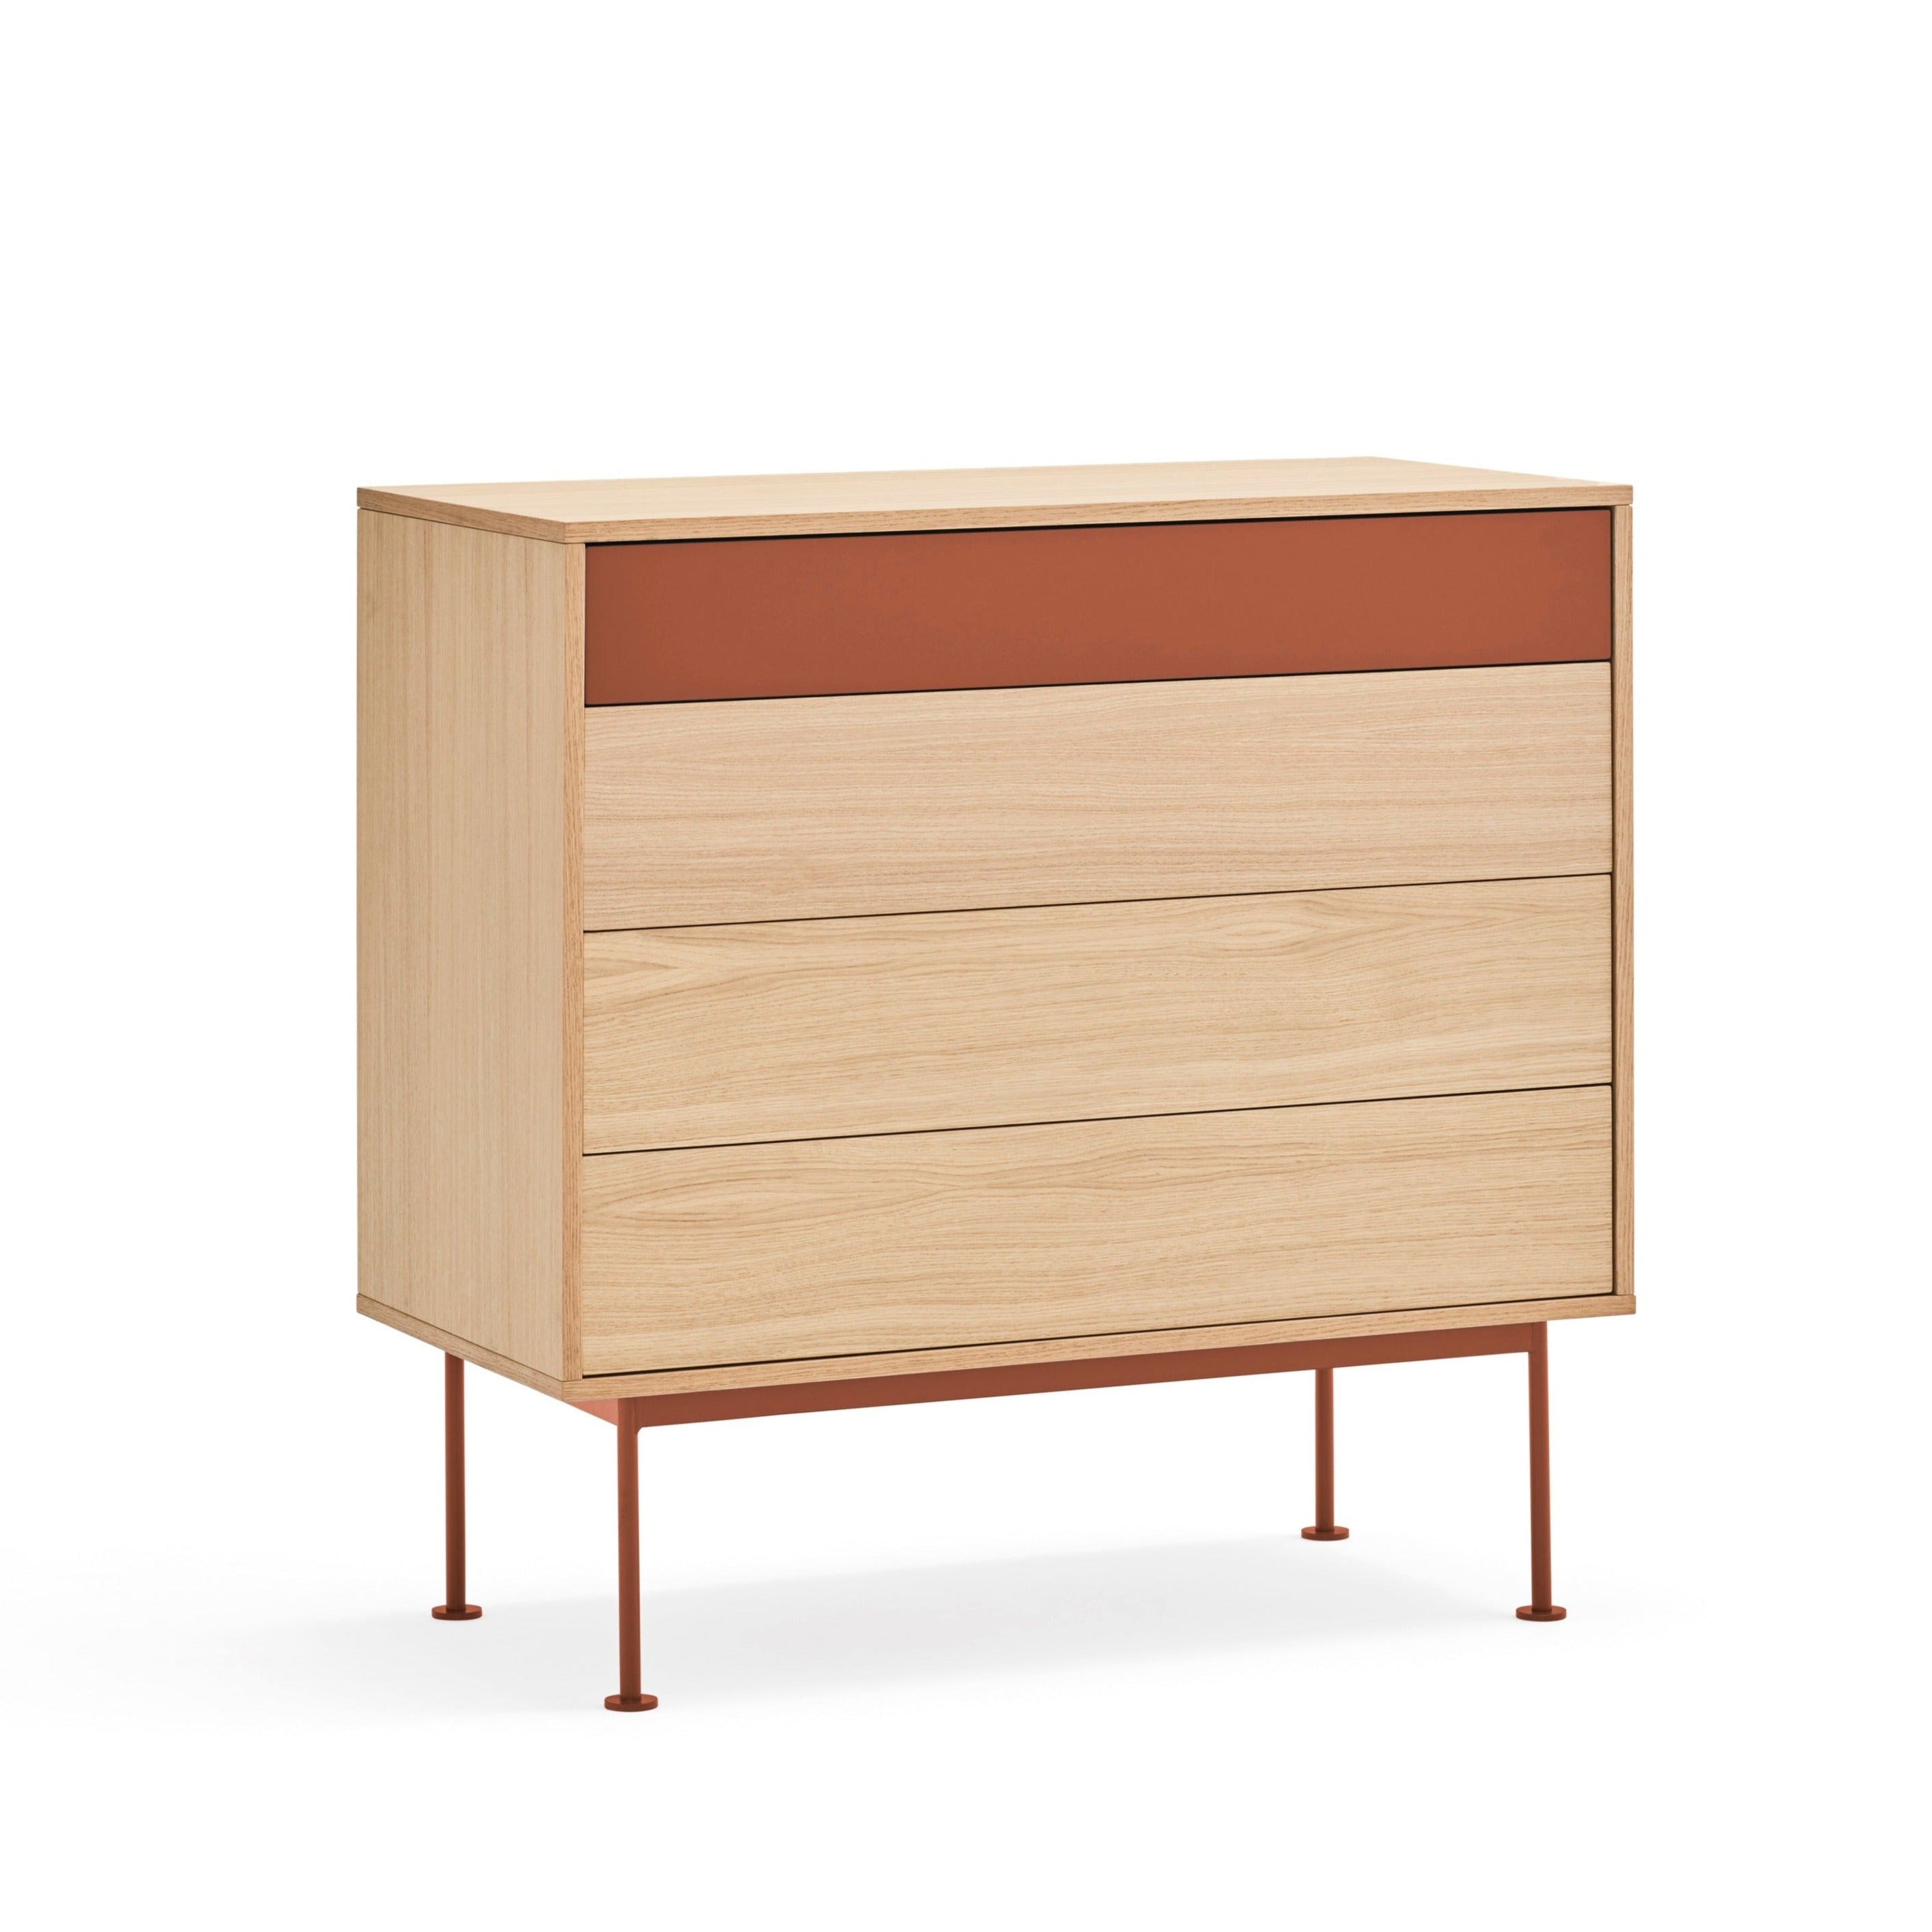 YOKO high chest of drawers red